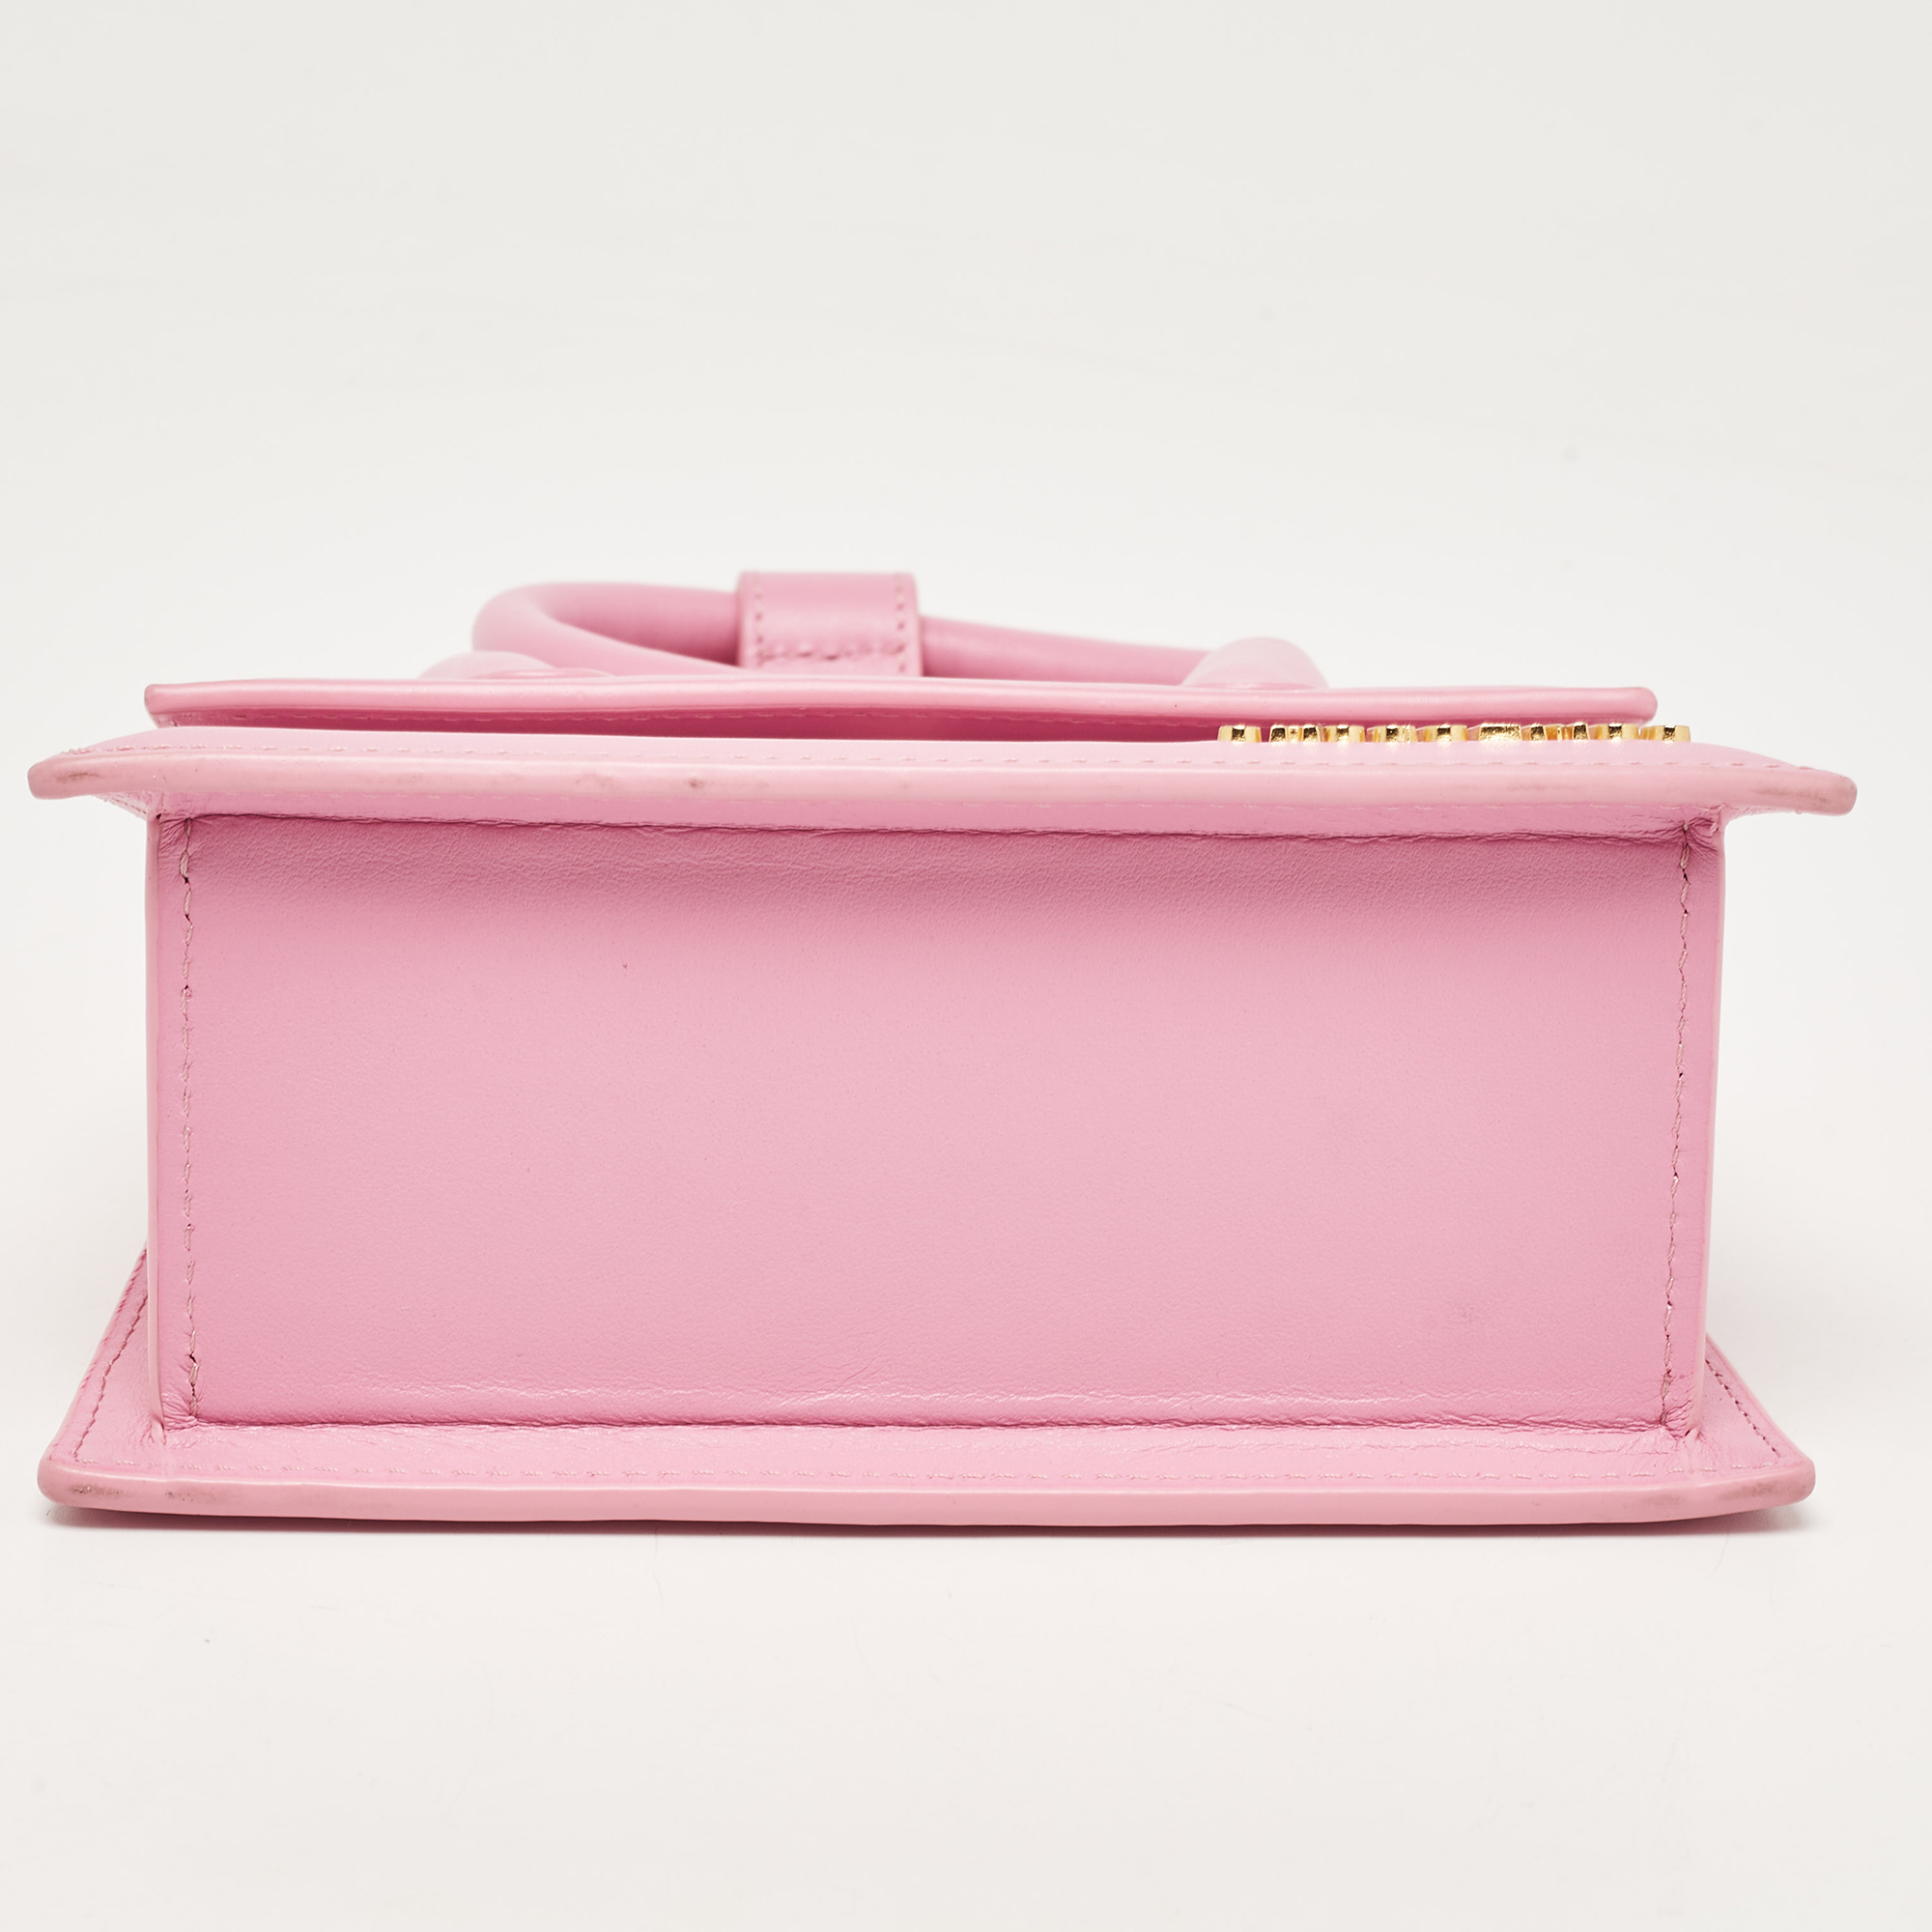 Jacquemus Pink Leather Le Chiquito Noeud Top Handle Bag